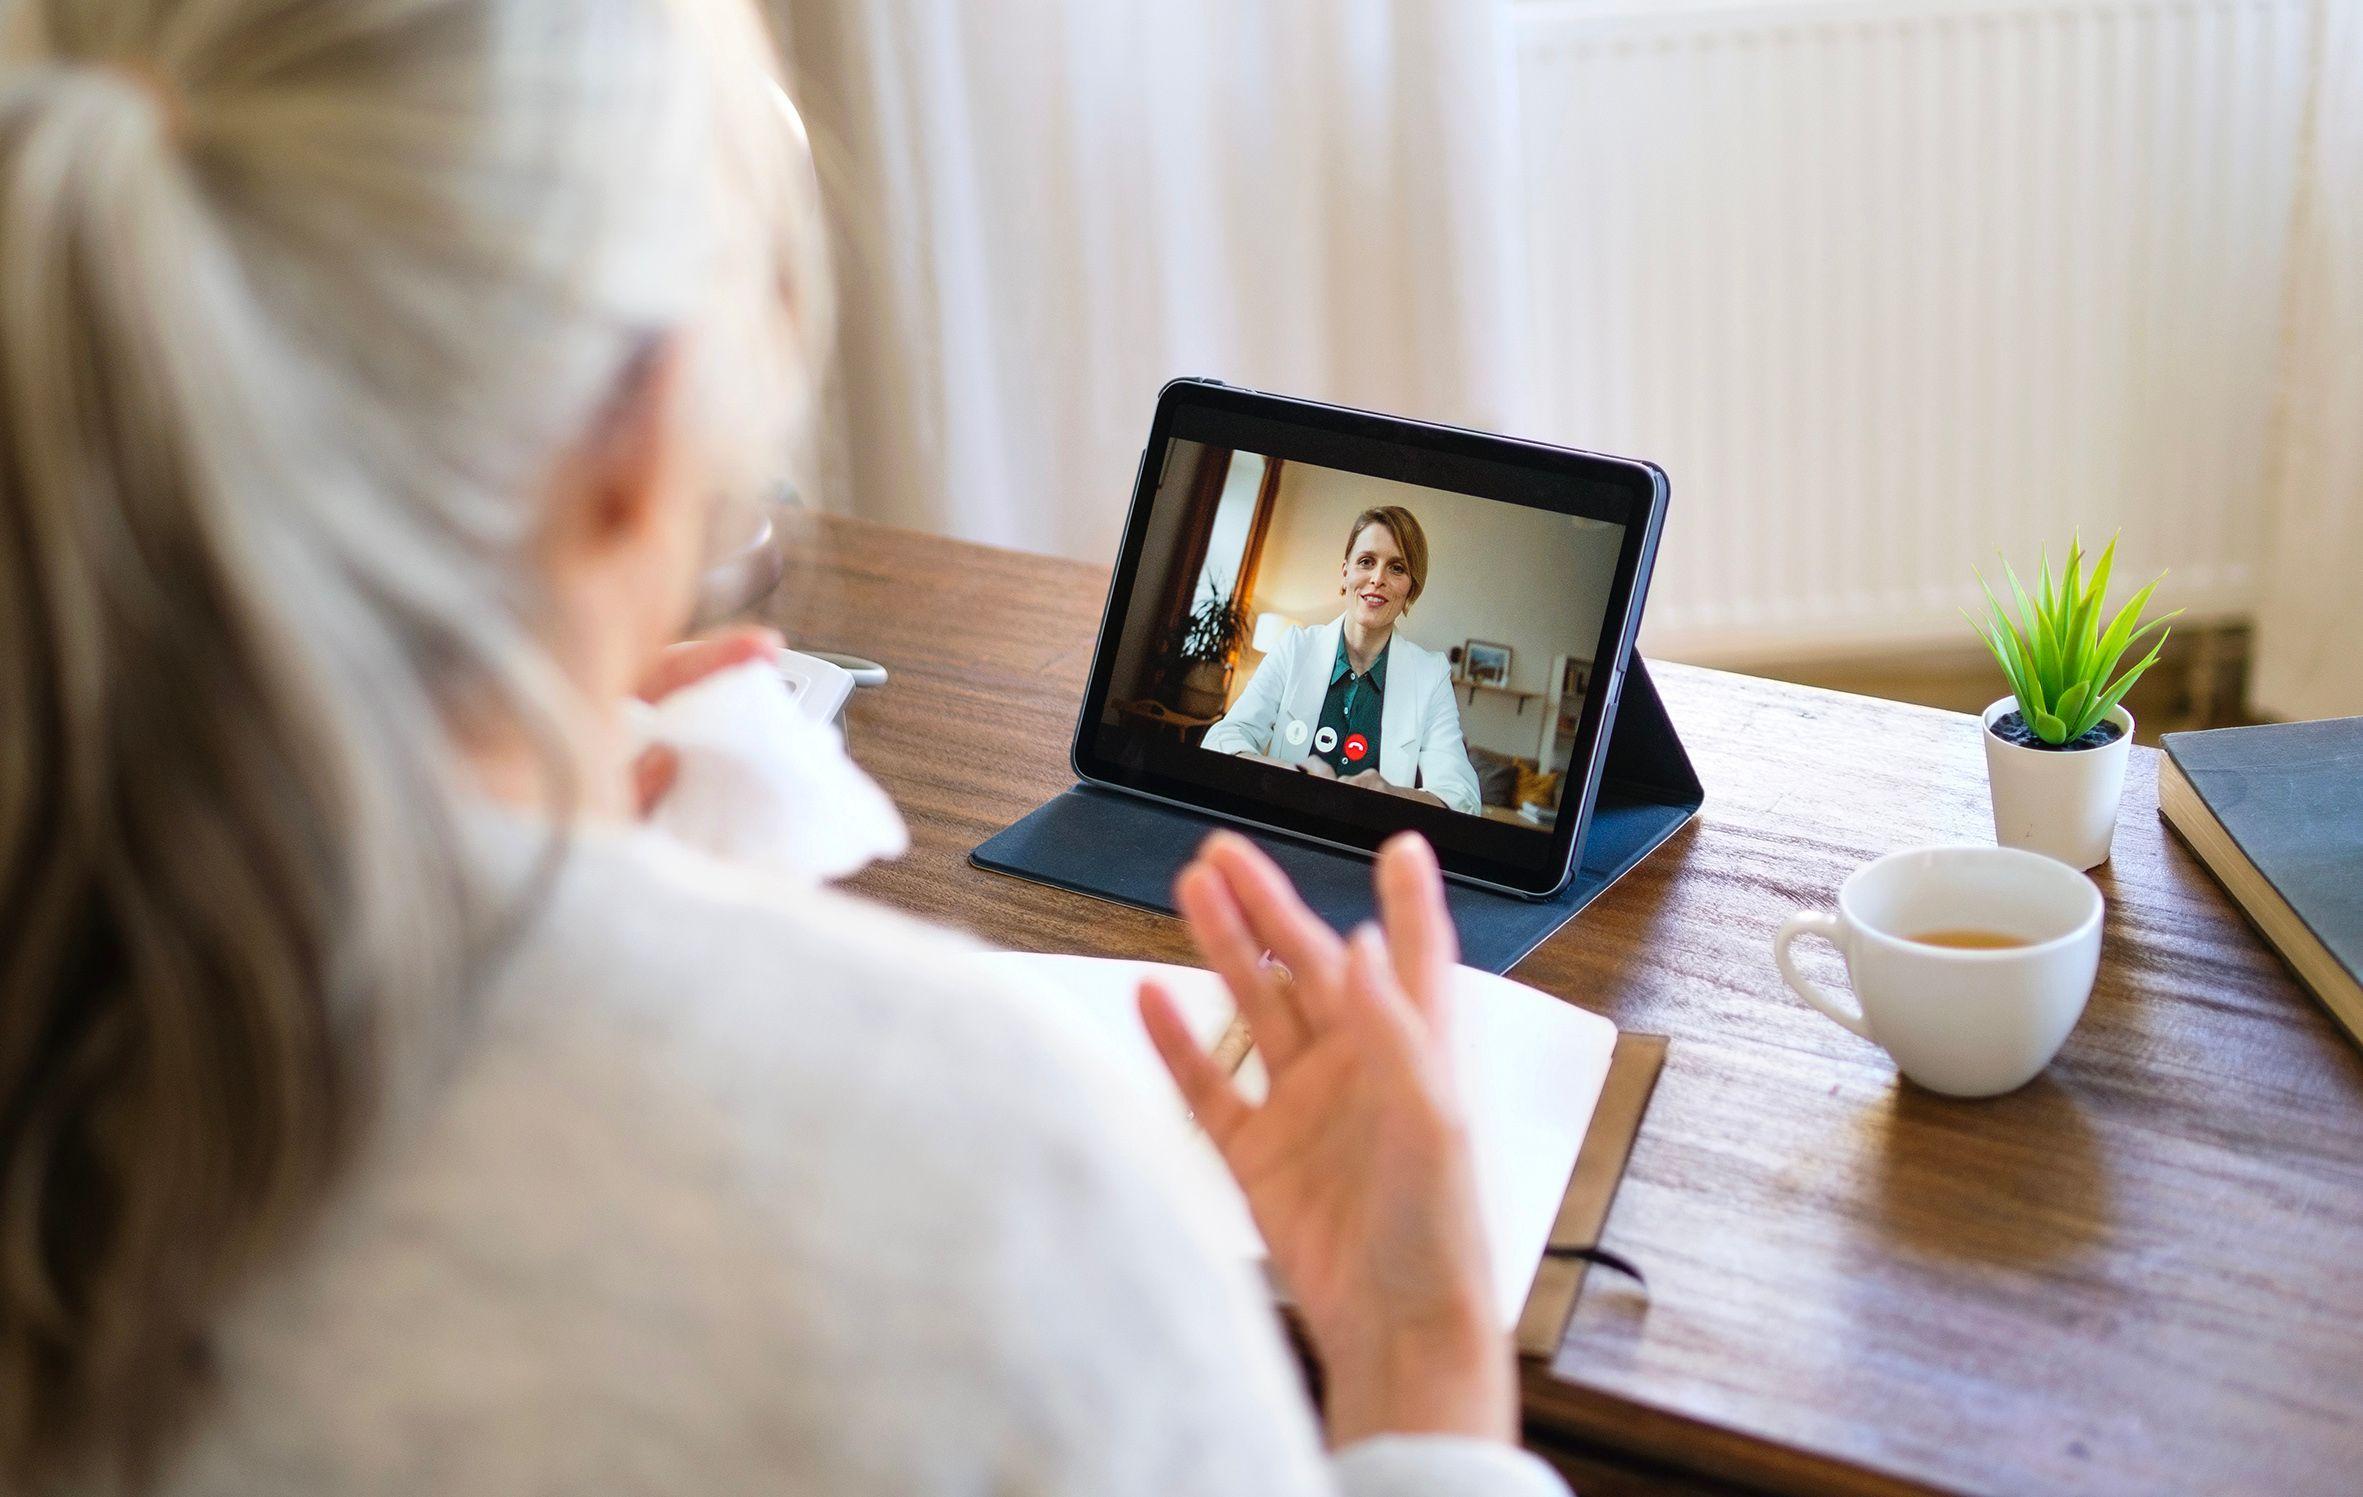 Menopausal woman meeting with a menopause-trained clinician during a telehealth consult